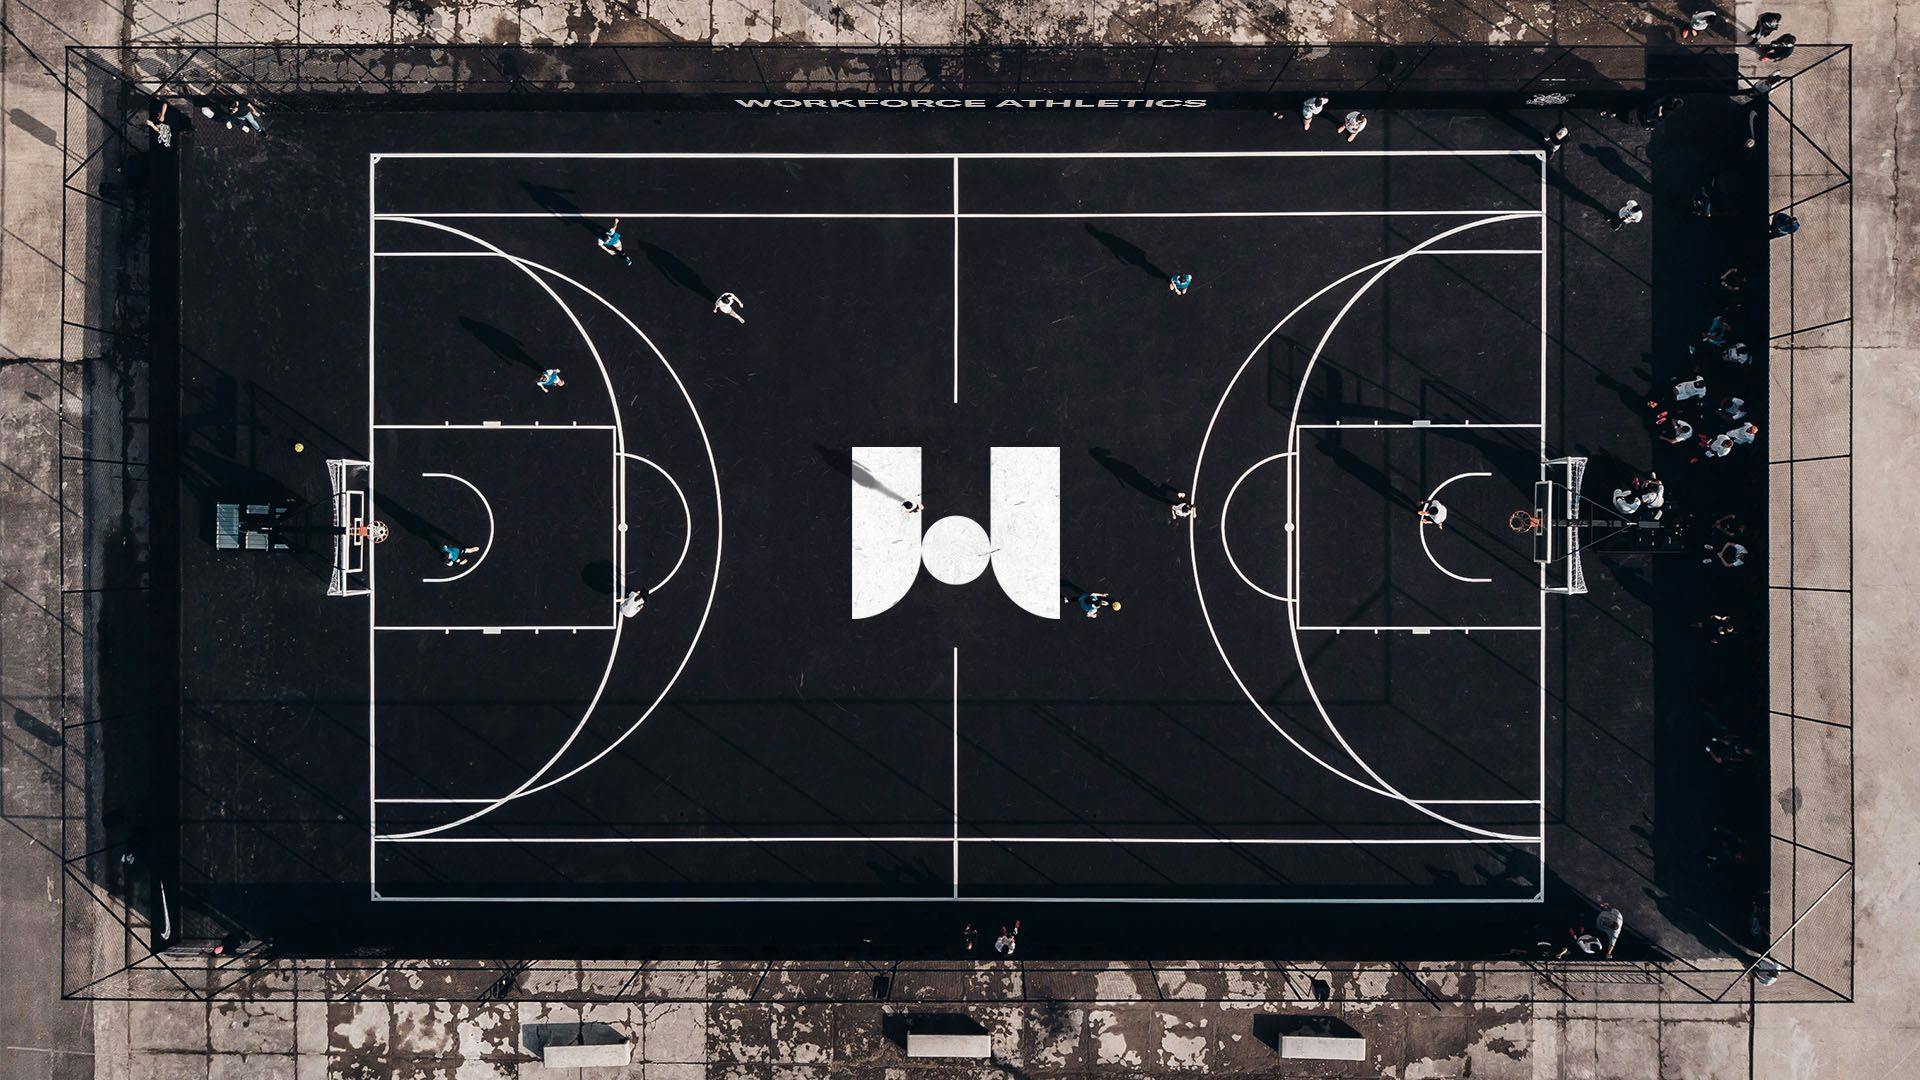 Aerial view of a basketball court with the WFA logo in the center